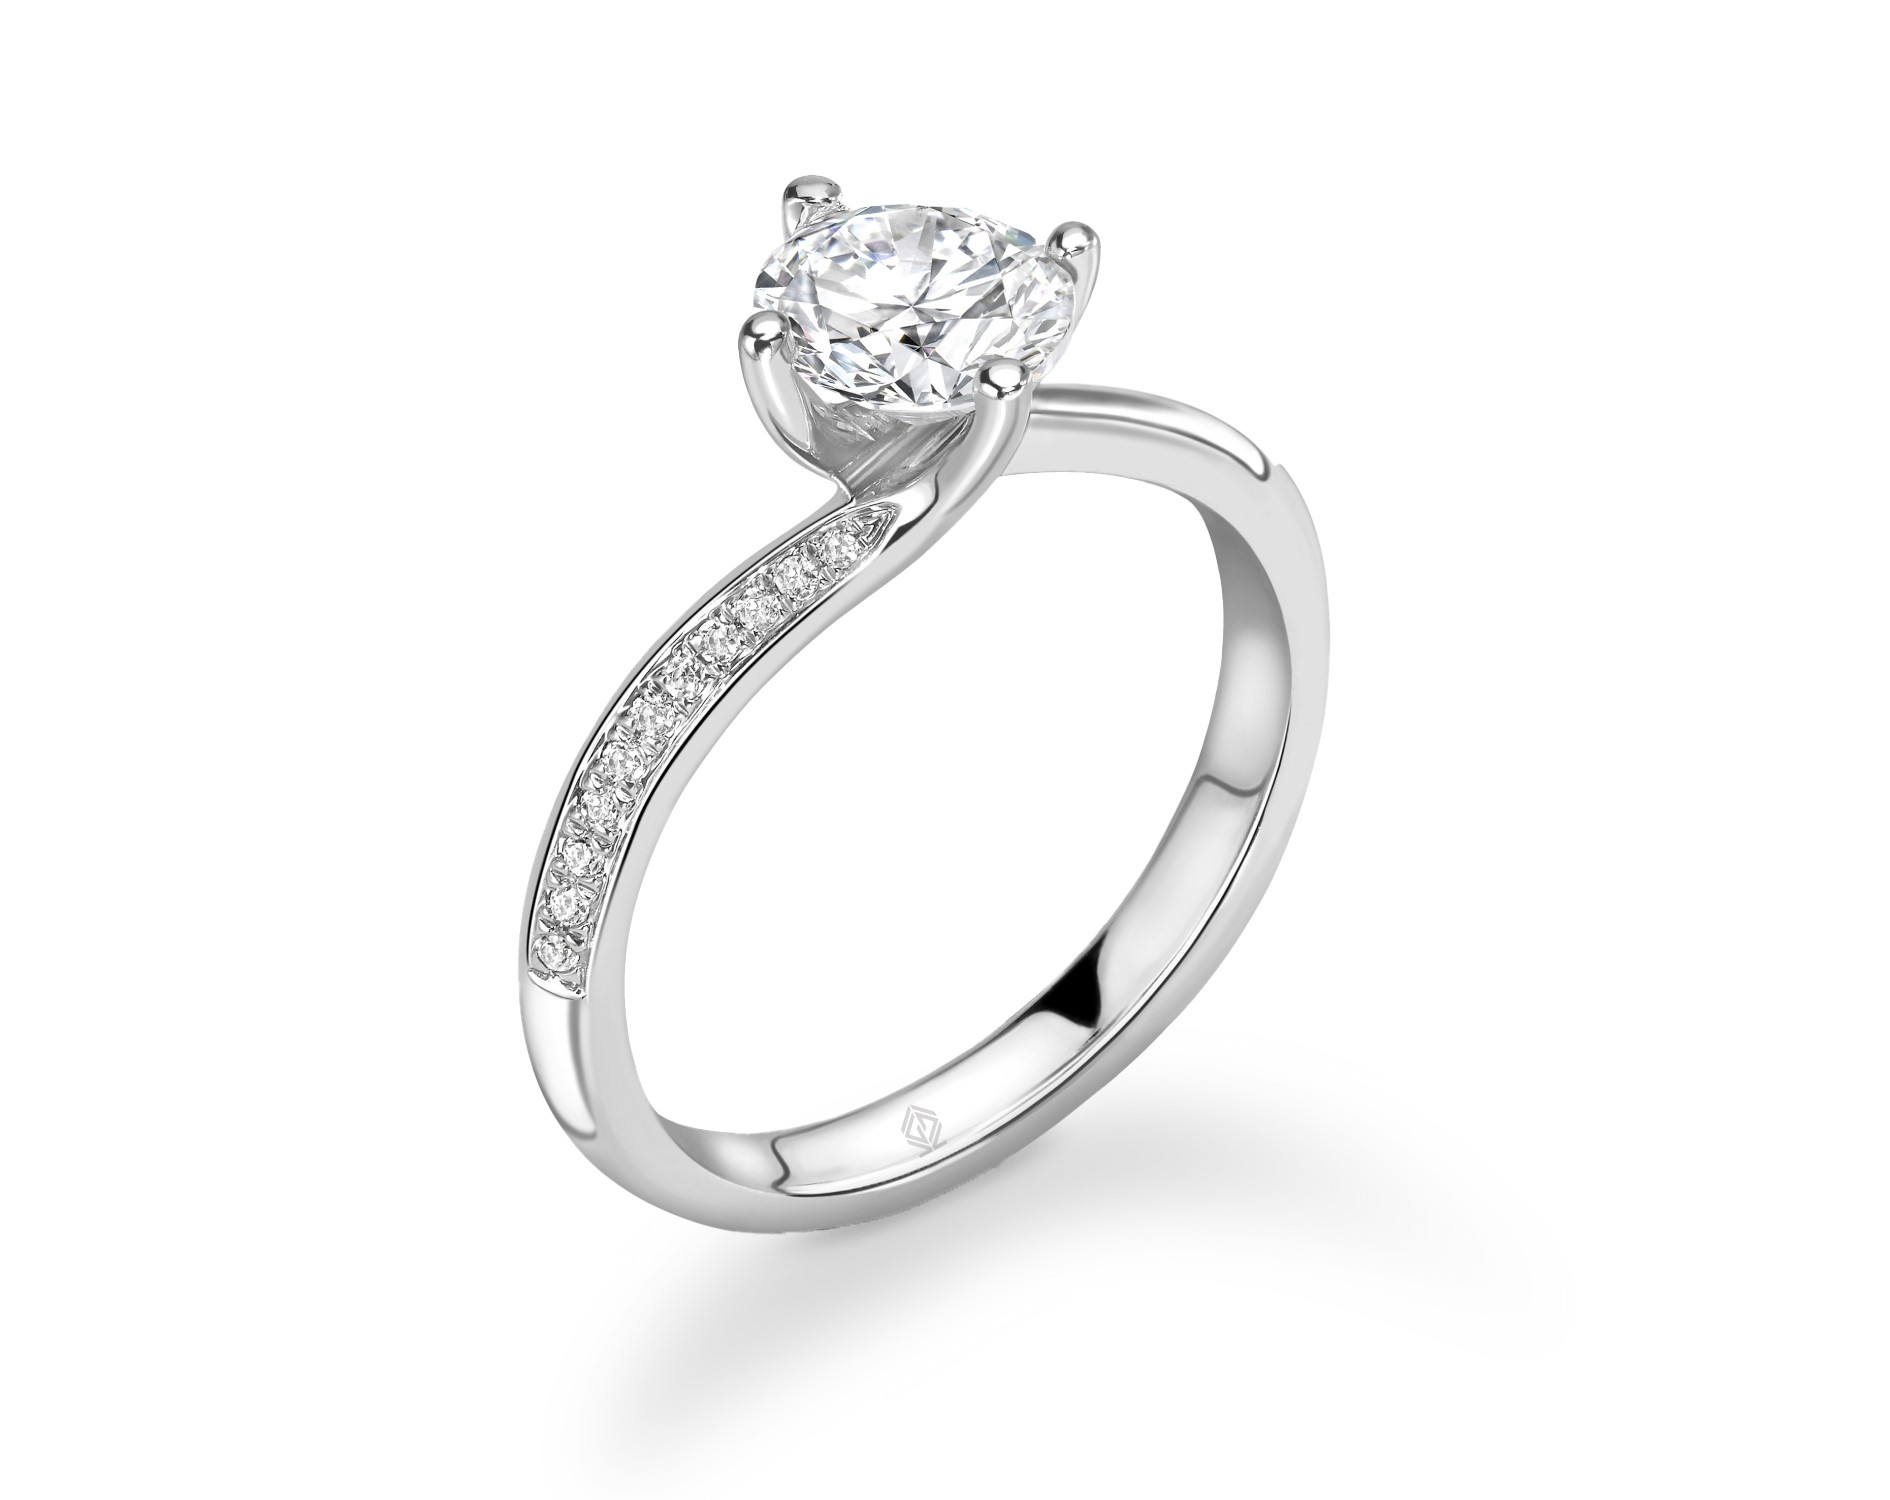 18K WHITE GOLD ROUND CUT 4 PRONG TWIST DIAMOND ENGAGEMENT RING WITH SIDE STONES